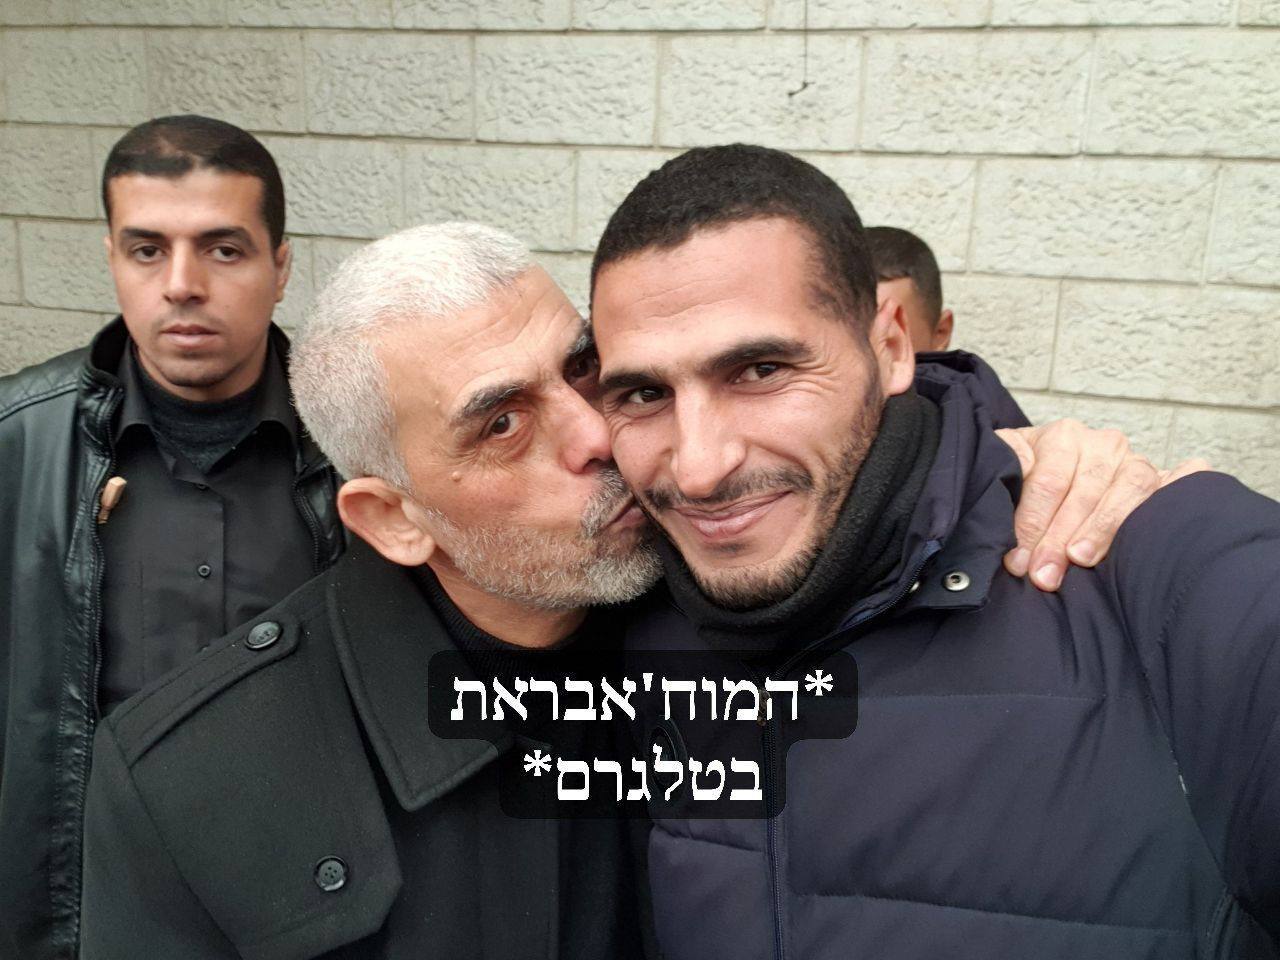 Independent reporter kissed by one of HAMAS leaders